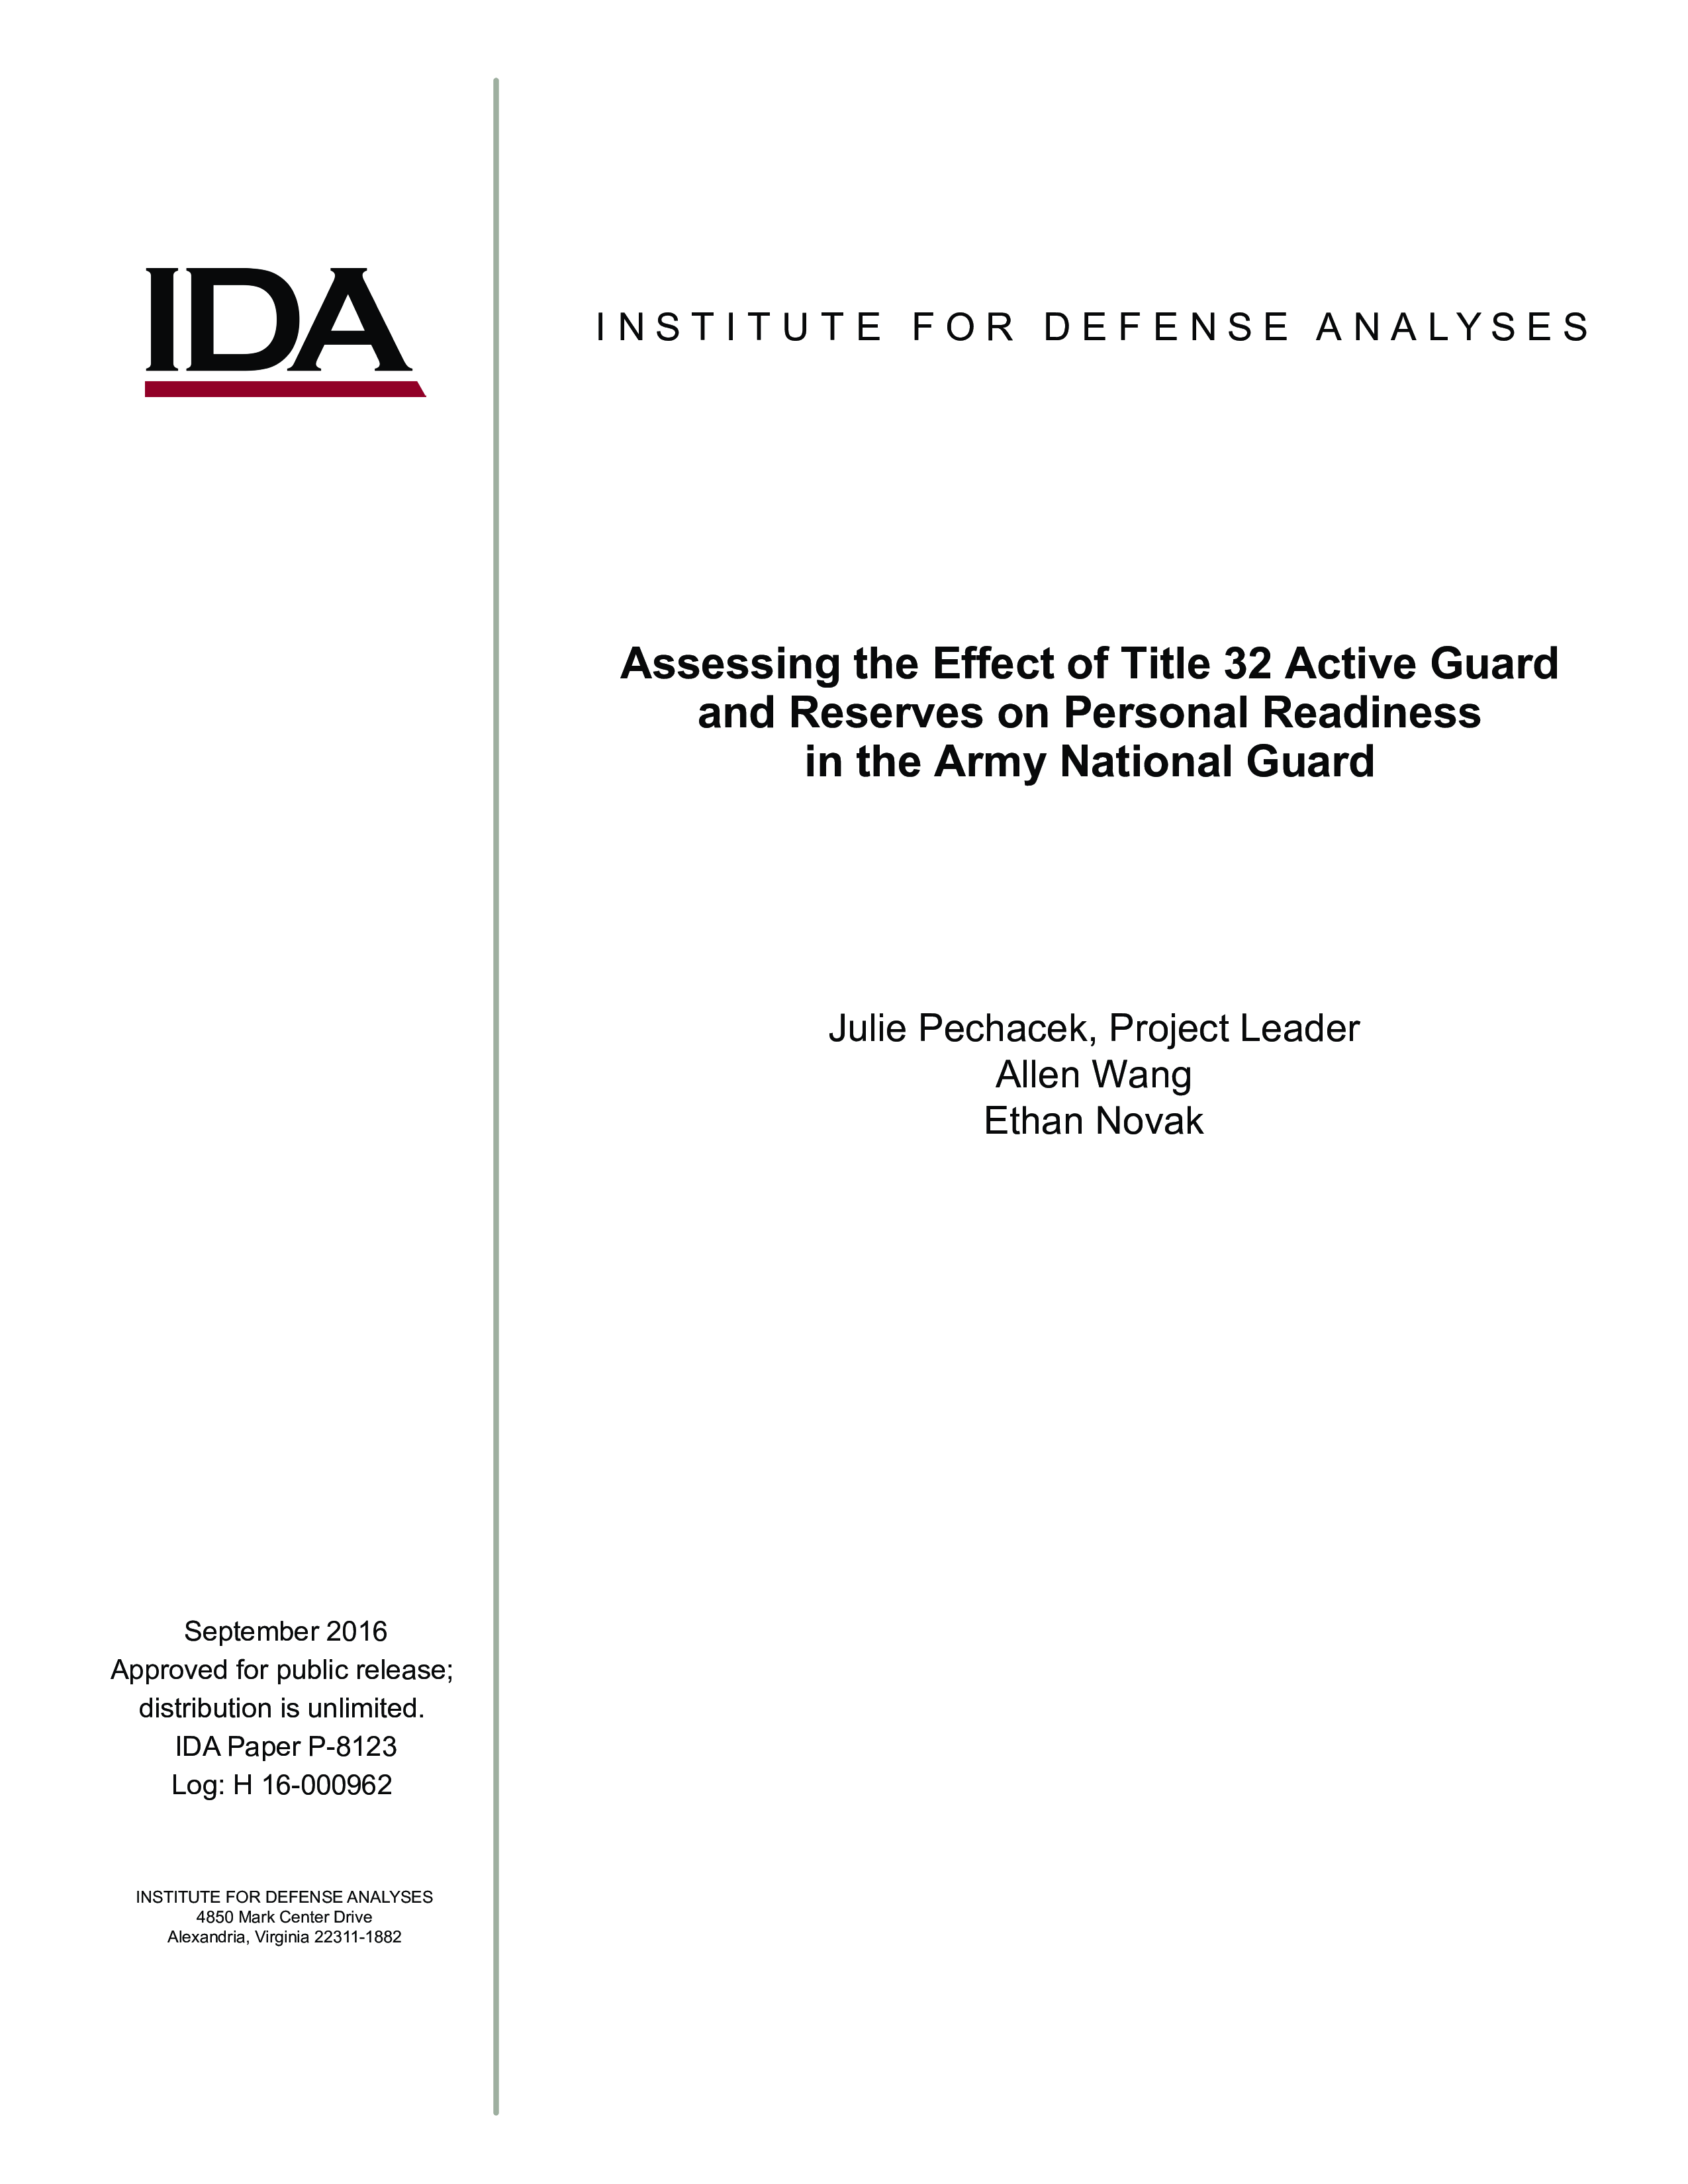 Assessing the Effect of Title 32 Active Guard and Reserves on Personal Readiness in the Army National Guard